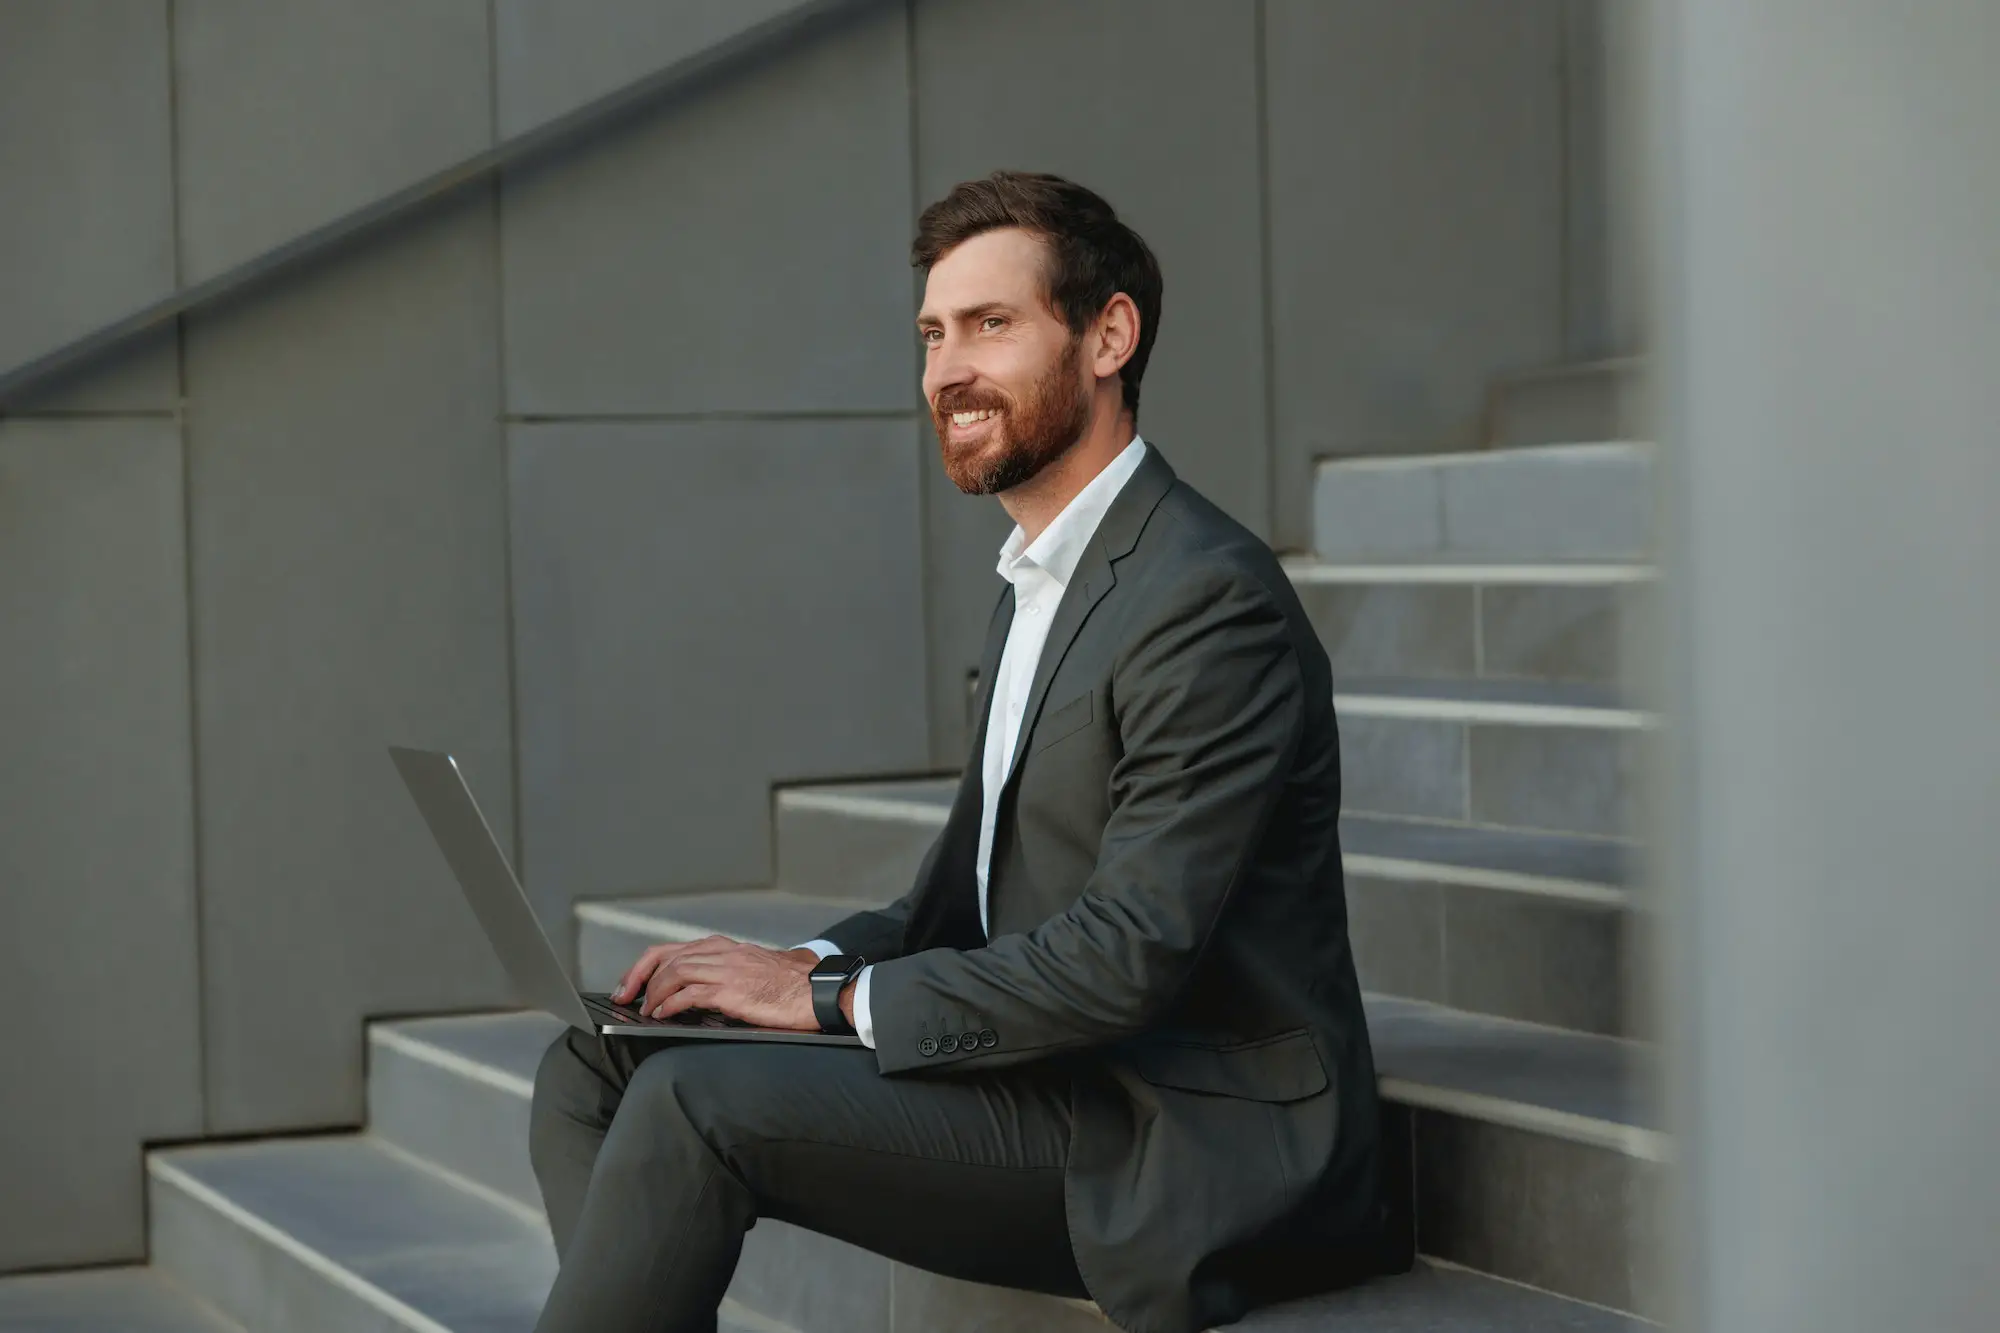 Focused Businessman working on laptop sitting on stairs outside office building